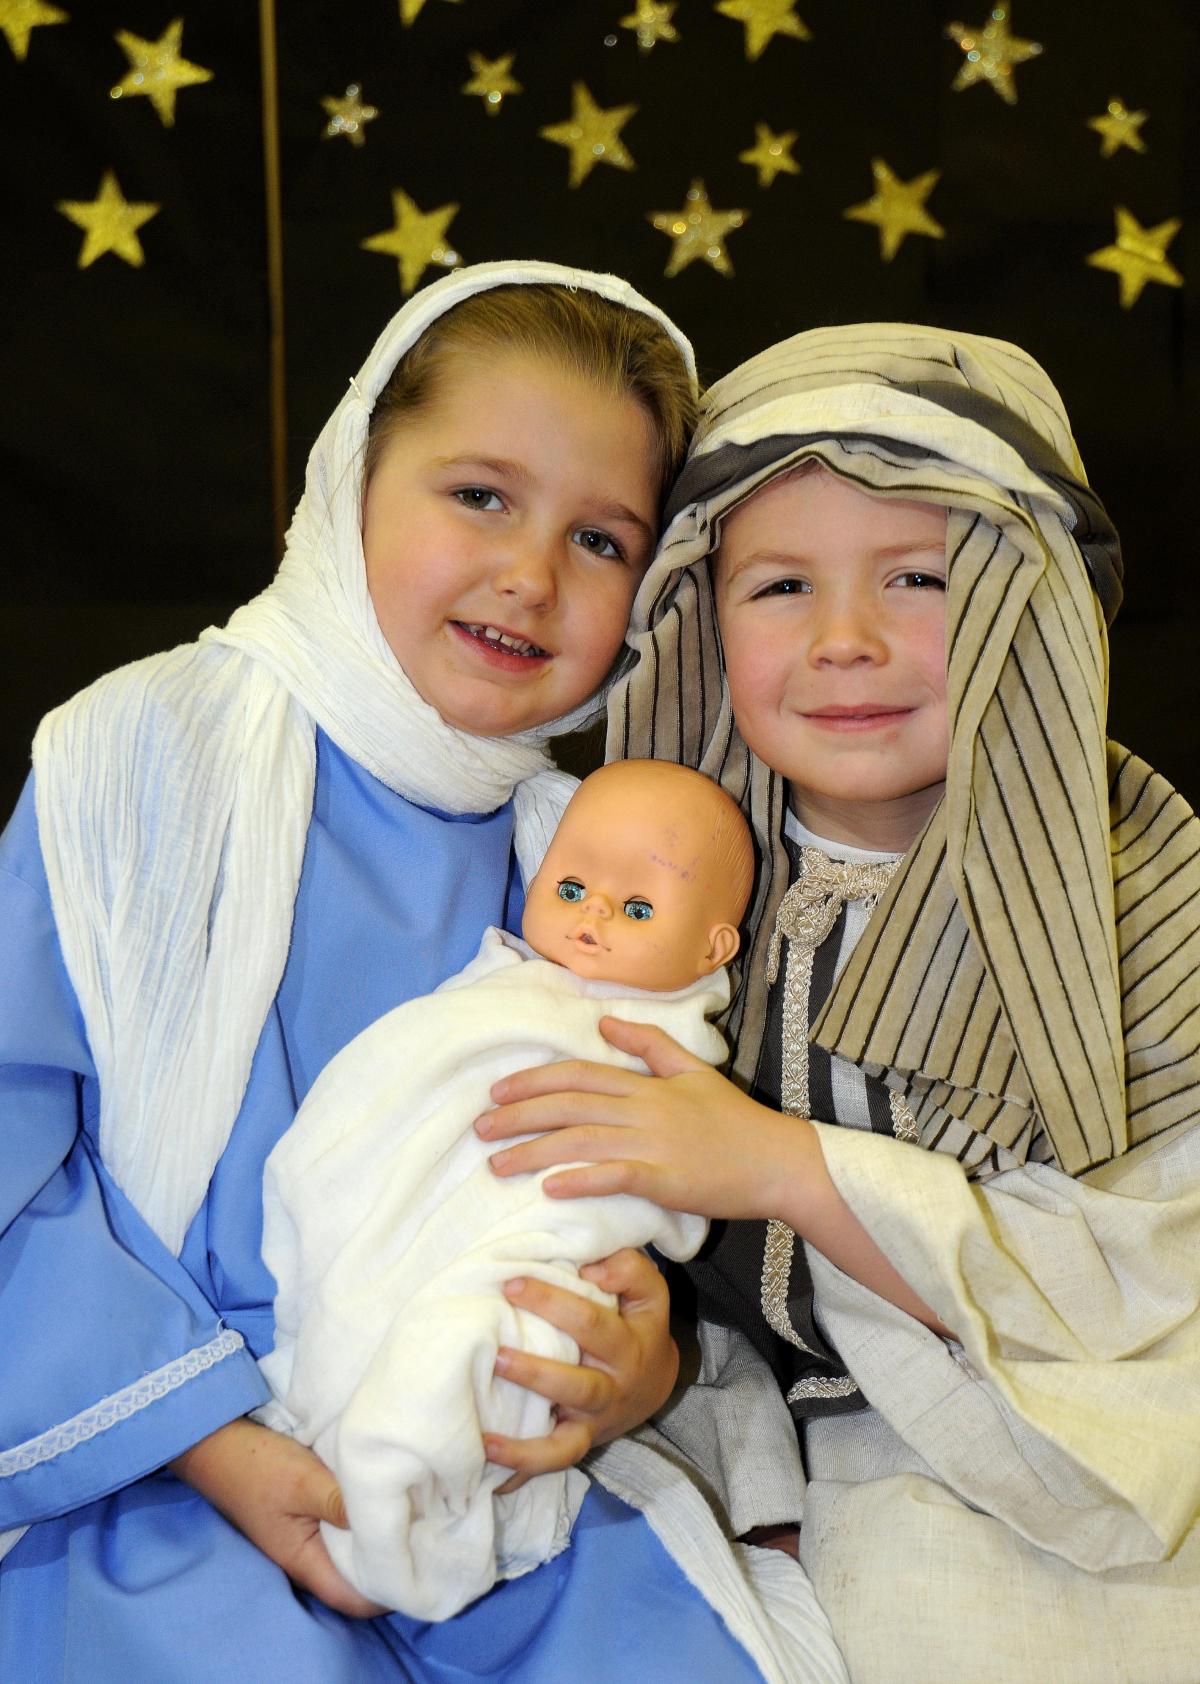 Appearing as Mary and Joseph in Rawdon St Peter's Primary School Nativity were Libby Whitaker-Keating and Joseph Wright